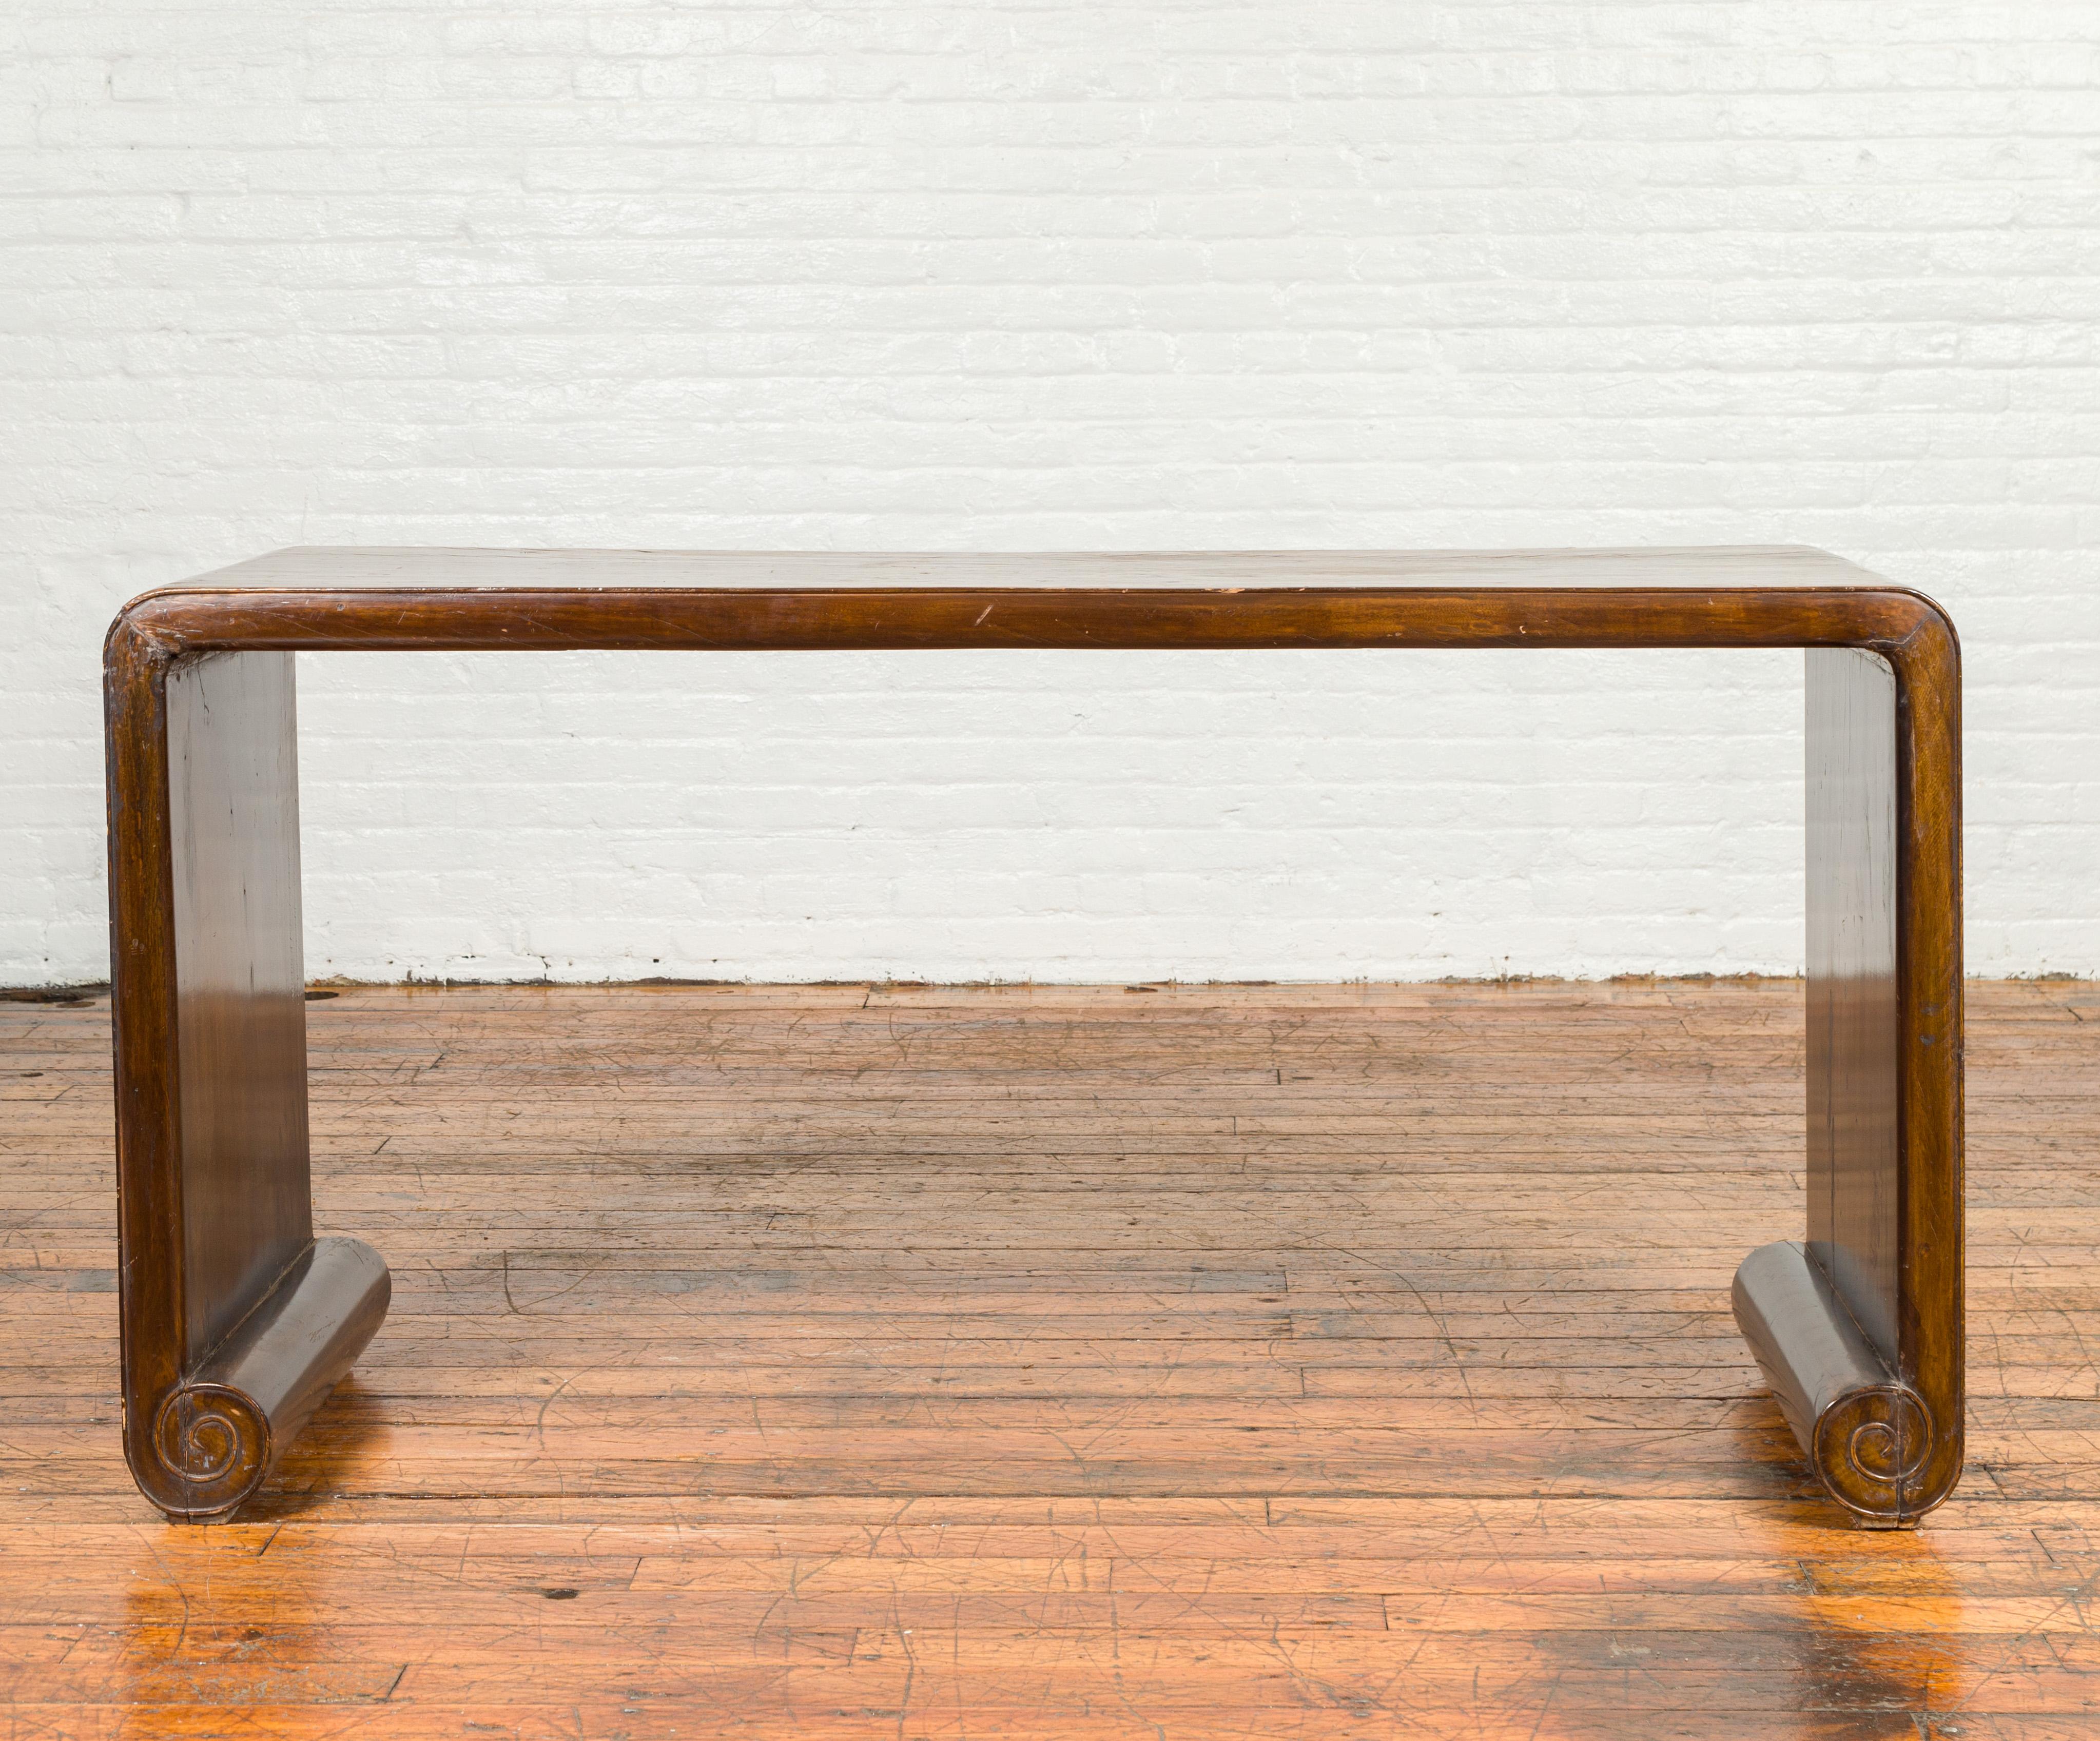 A Chinese Qing Dynasty period heavily distressed waterfall console table from the 19th century, with rollbar legs. Crafted in China during the 19th century this console table features a waterfall wooden frame with solid boards, boasting a nicely